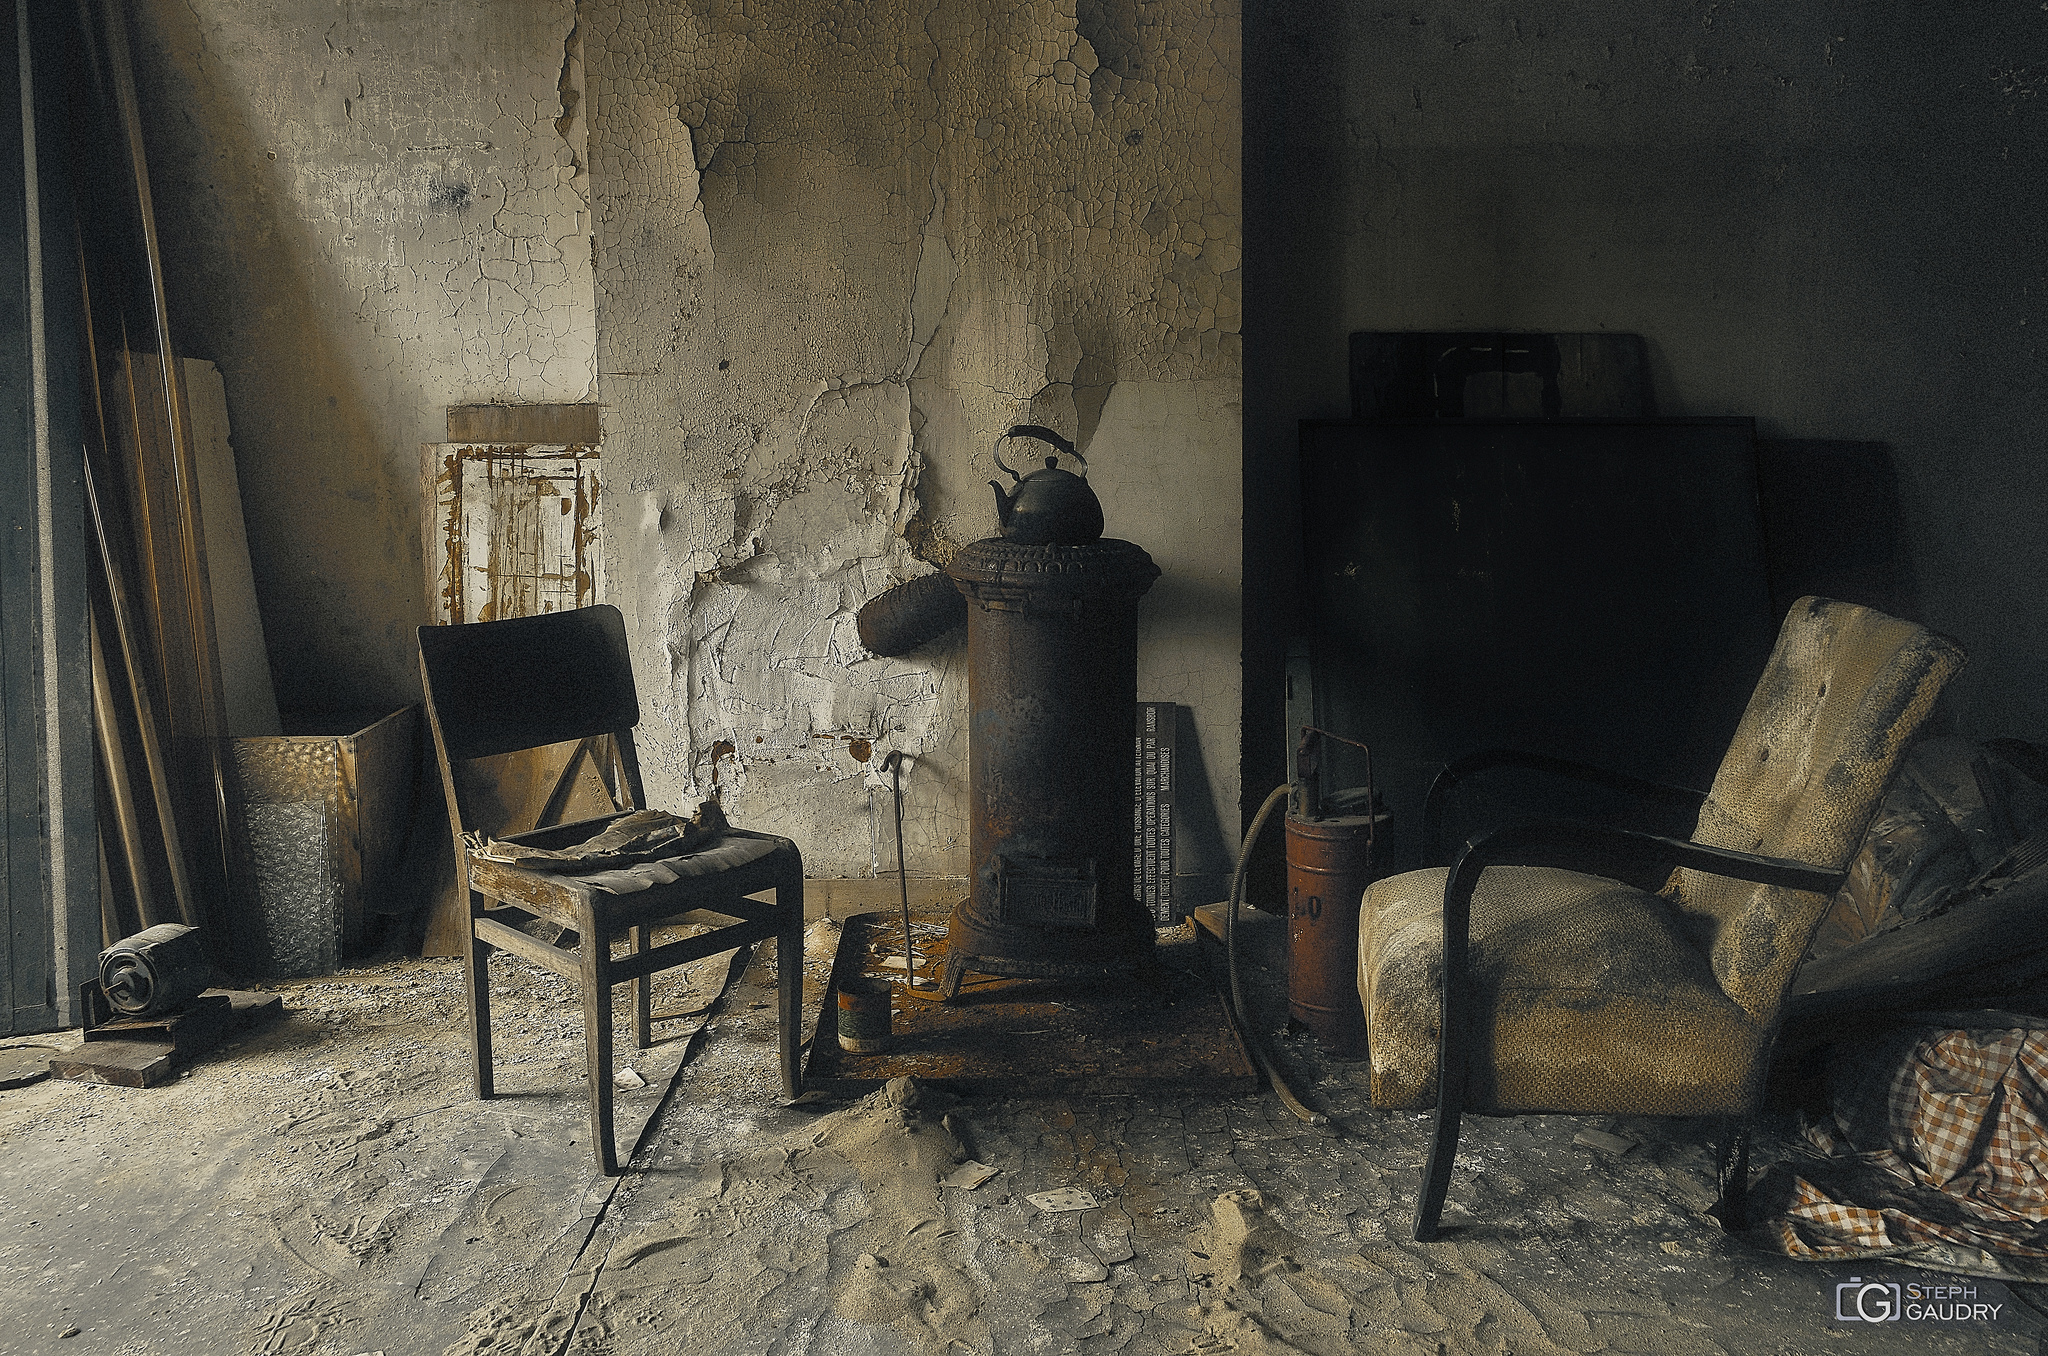 A comfortable chair and the warmth of a good stove [Klik om de diavoorstelling te starten]